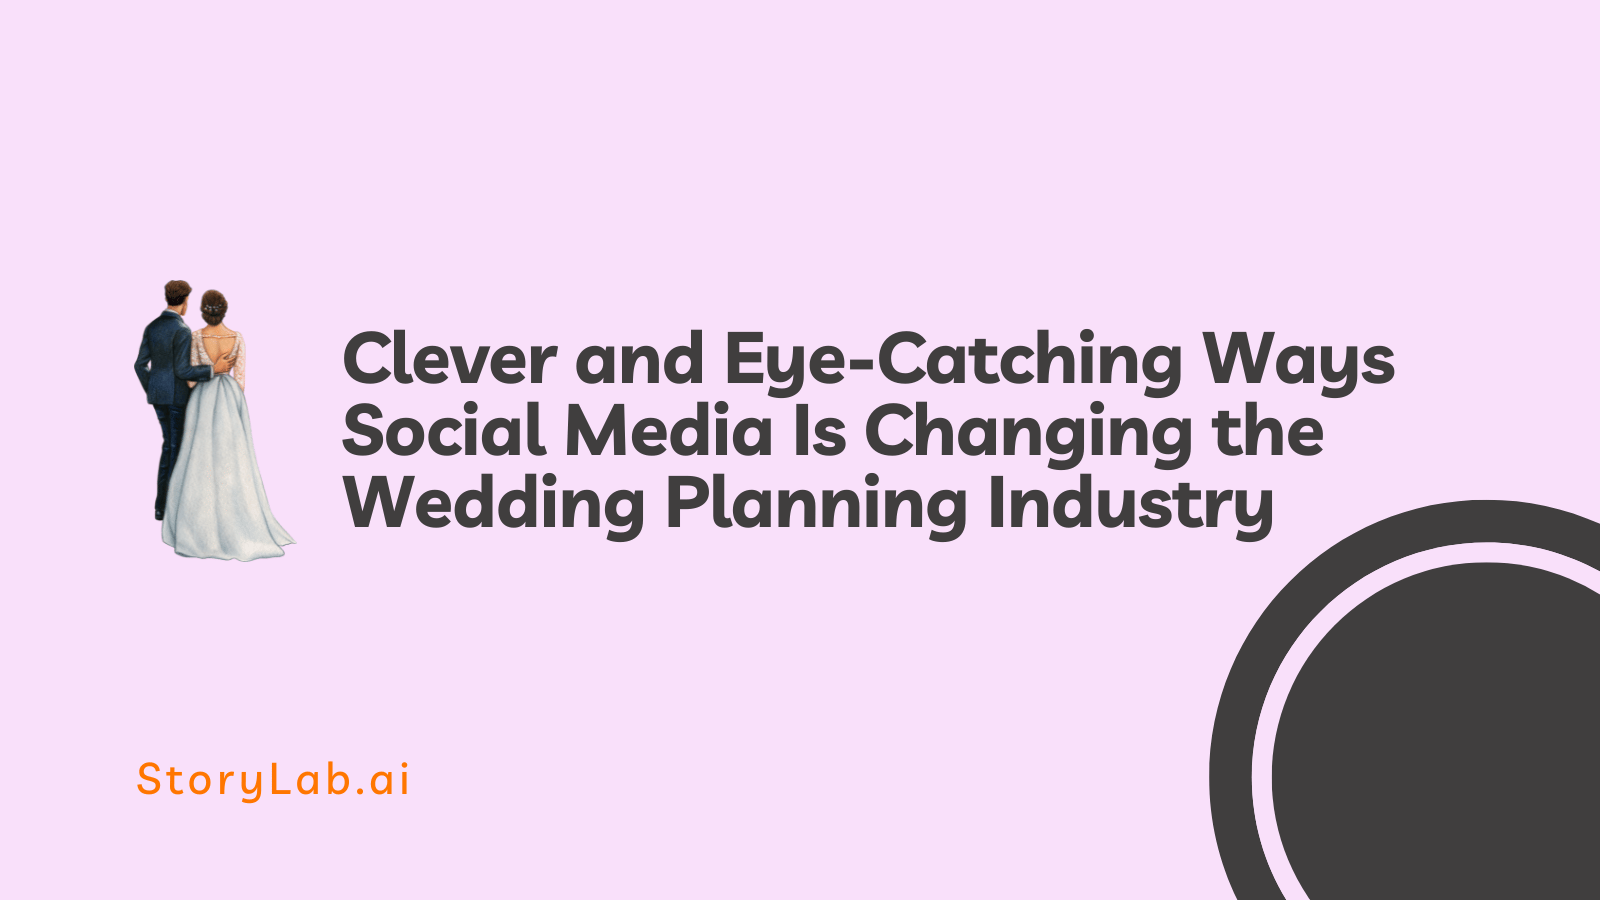 Clever and Eye-Catching Ways Social Media Is Changing the Wedding Planning Industry